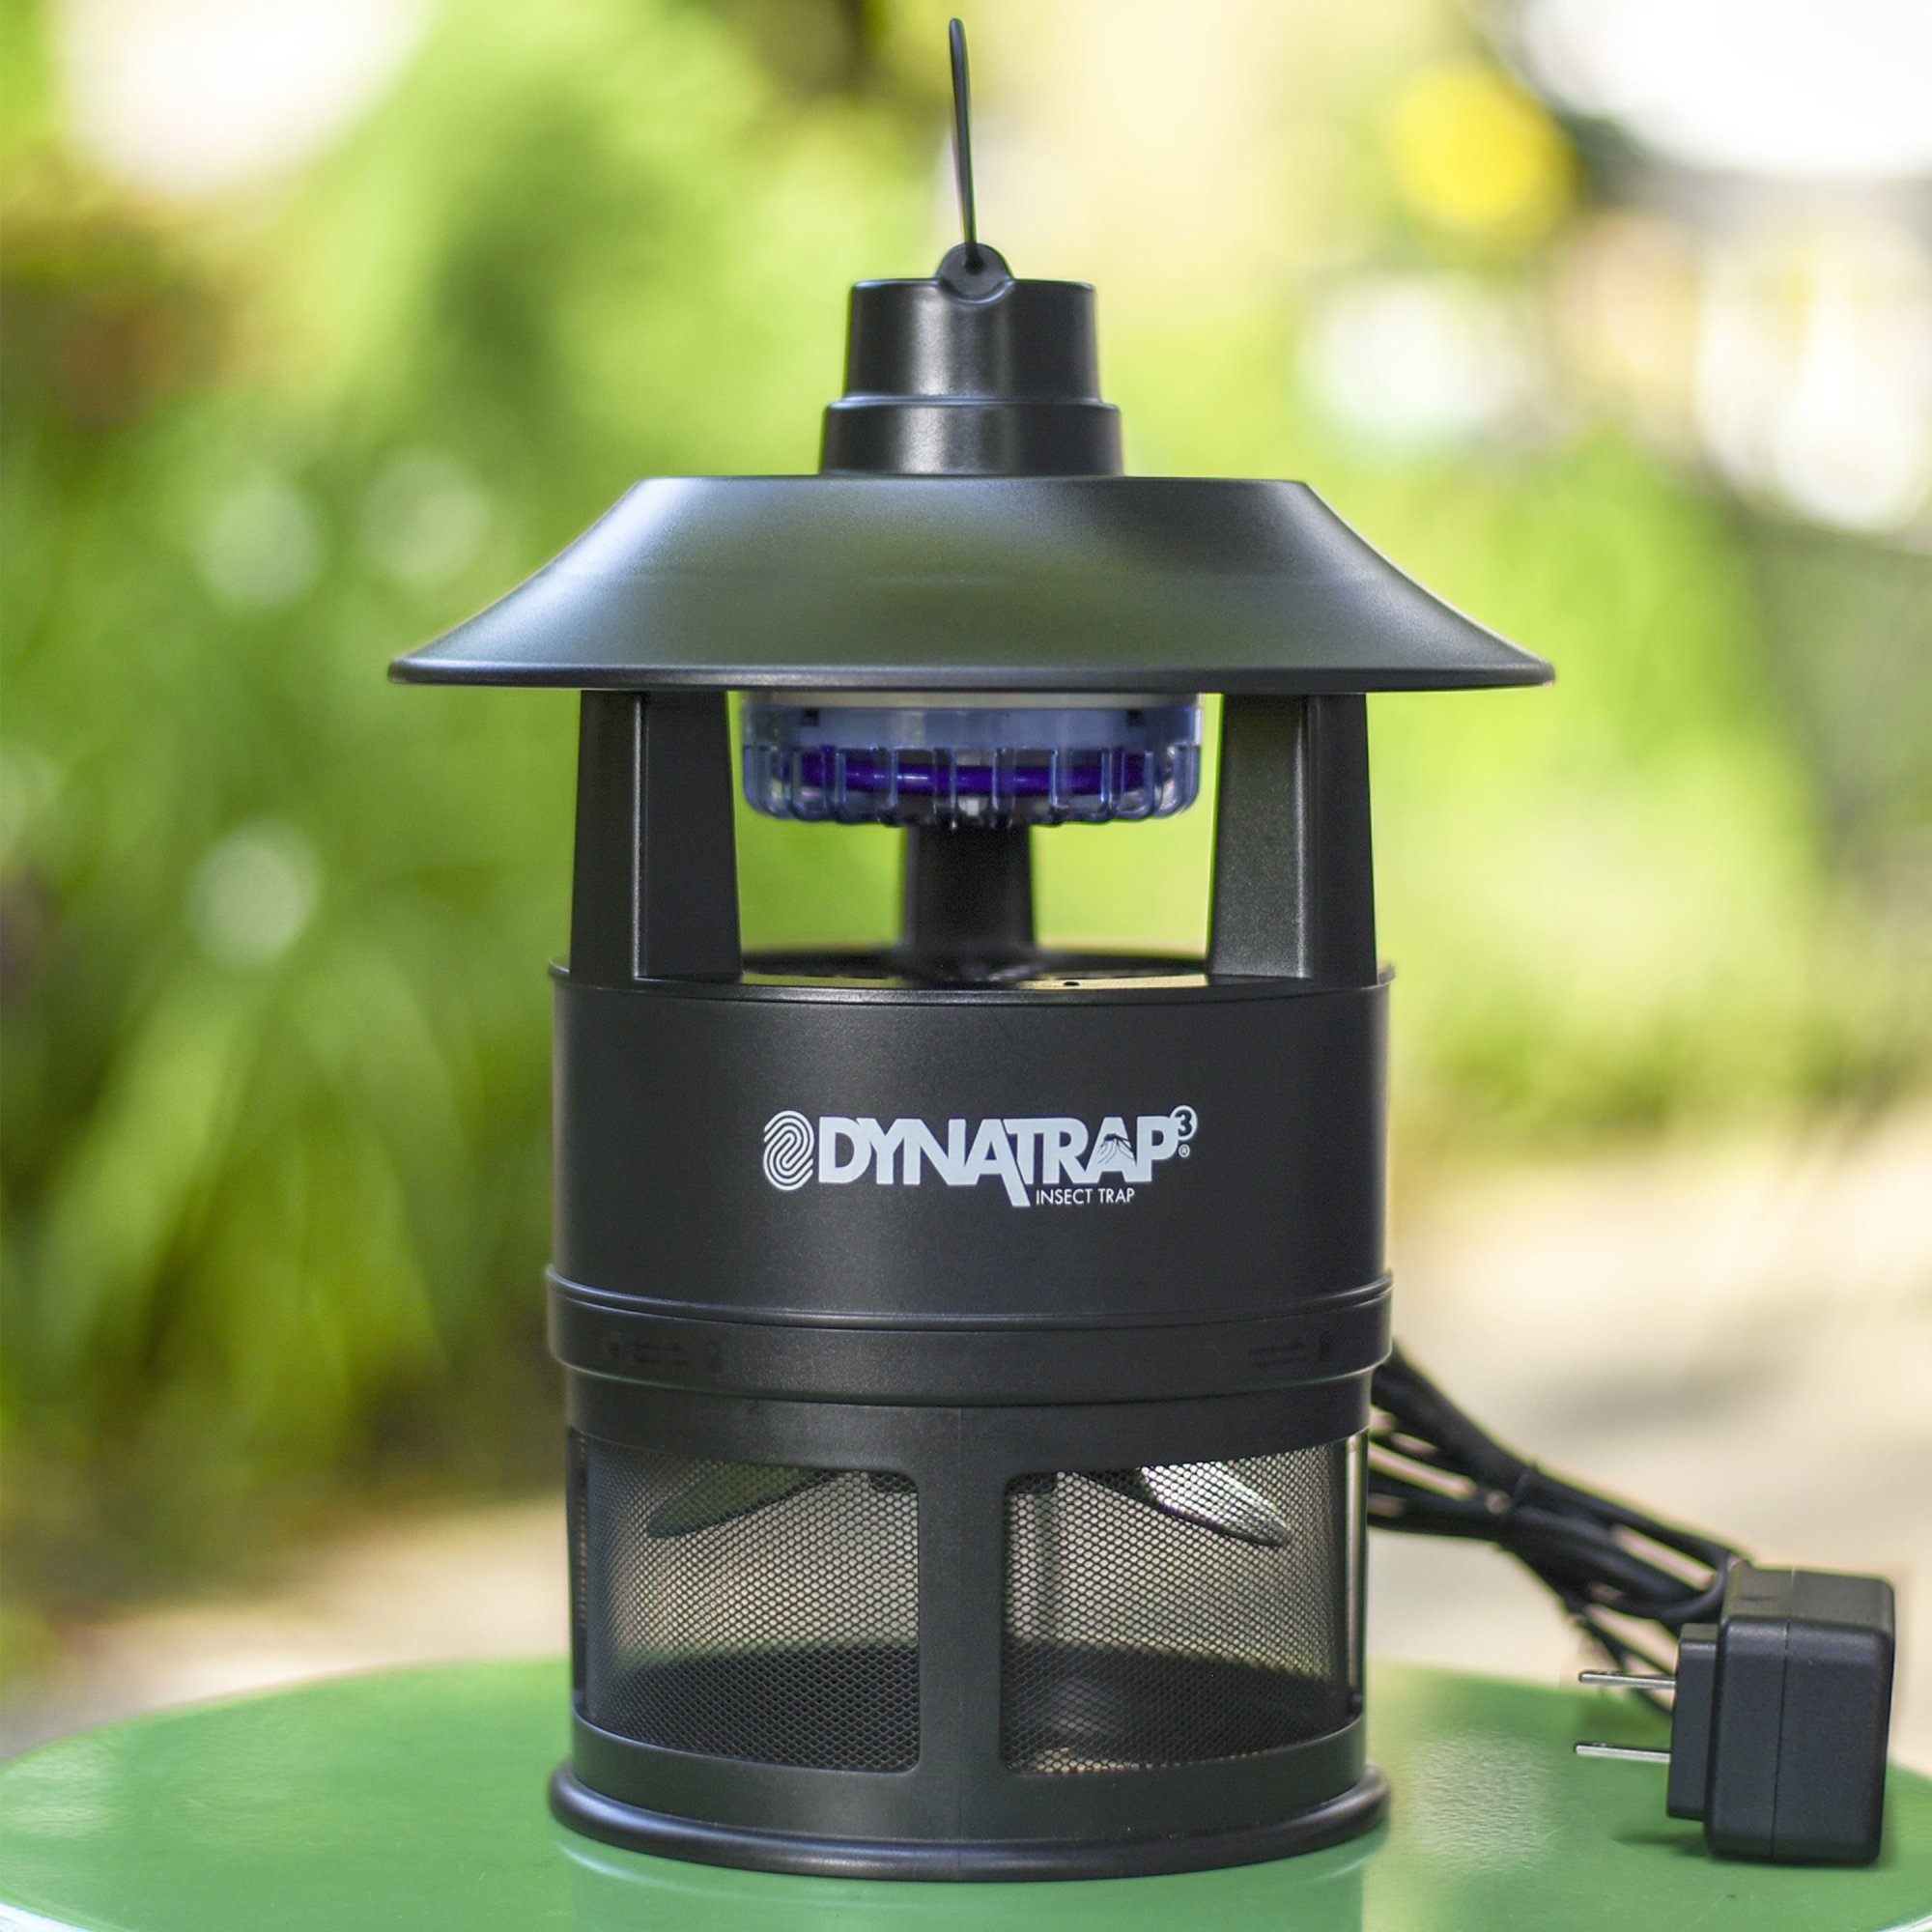 DynaTrap Black 1/4 Acre Outdoor Mosquito & Insect Trap - Shop